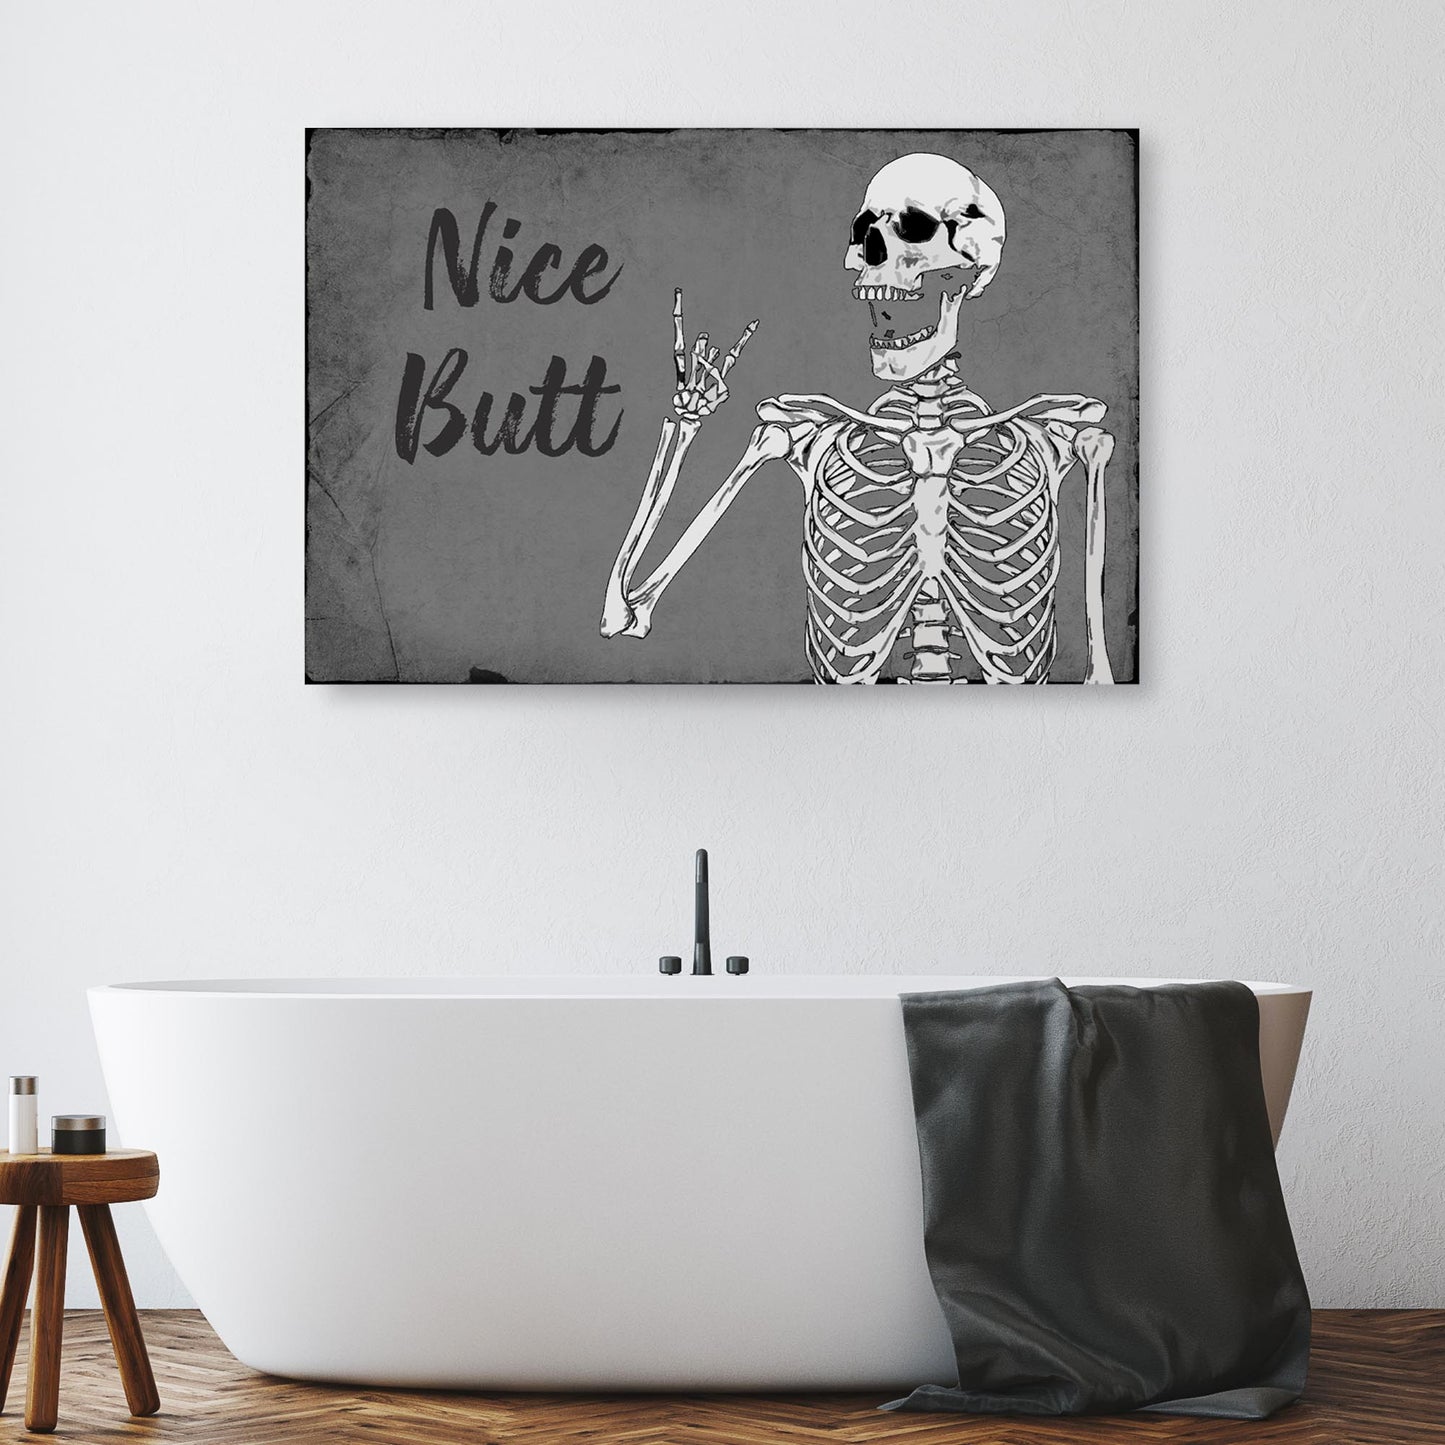 Nice Butt Toilet Sign - Image by Tailored Canvases